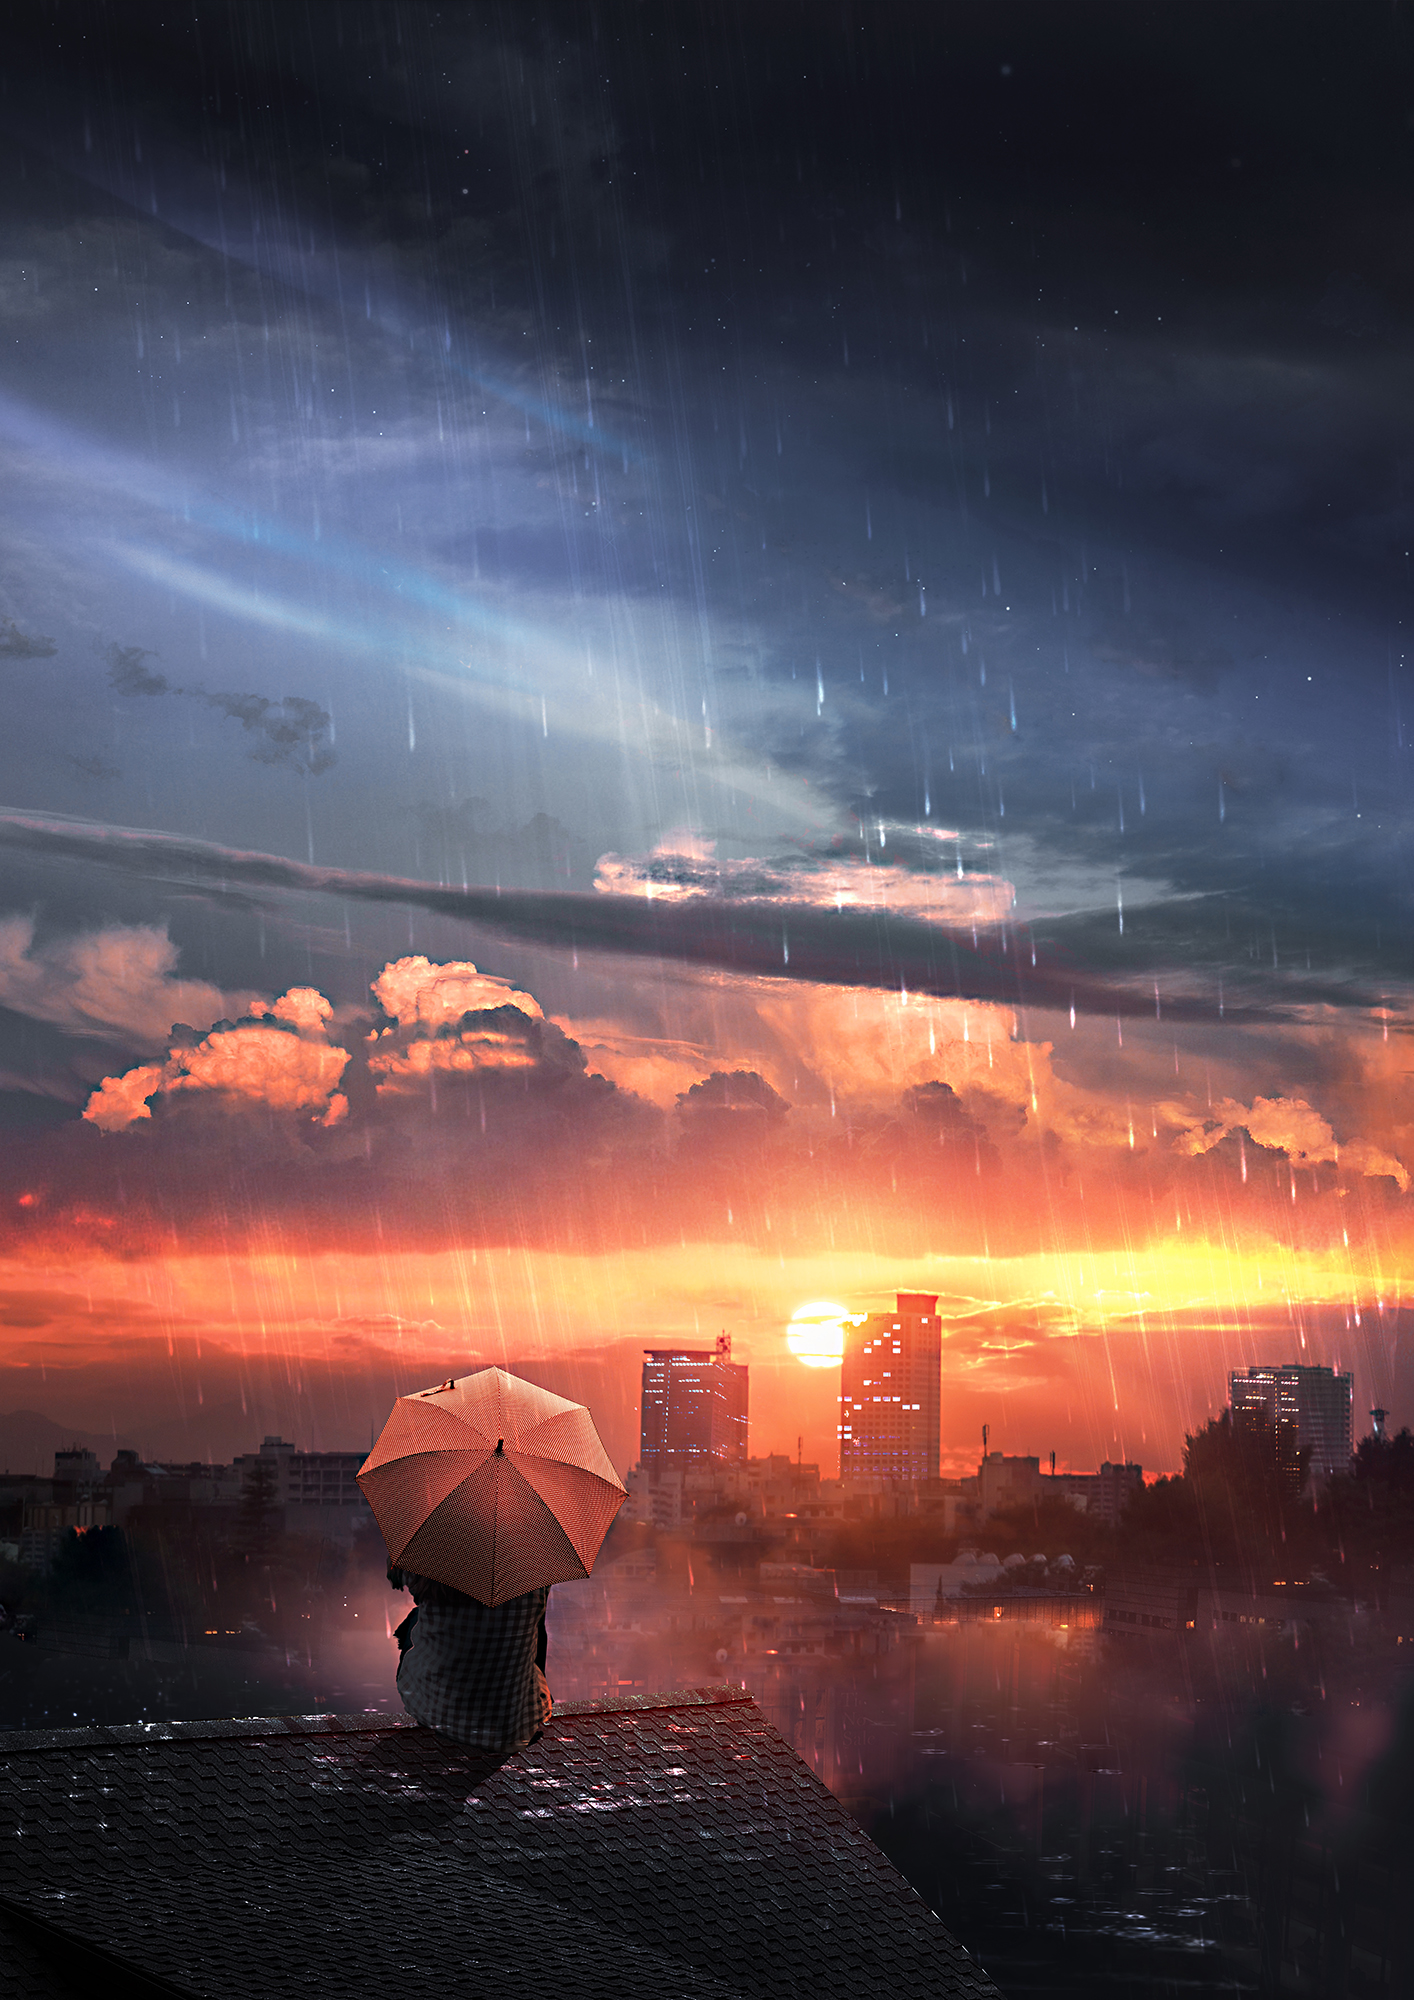 rain, privacy, loneliness, art, night, roof, seclusion, sky, umbrella phone wallpaper